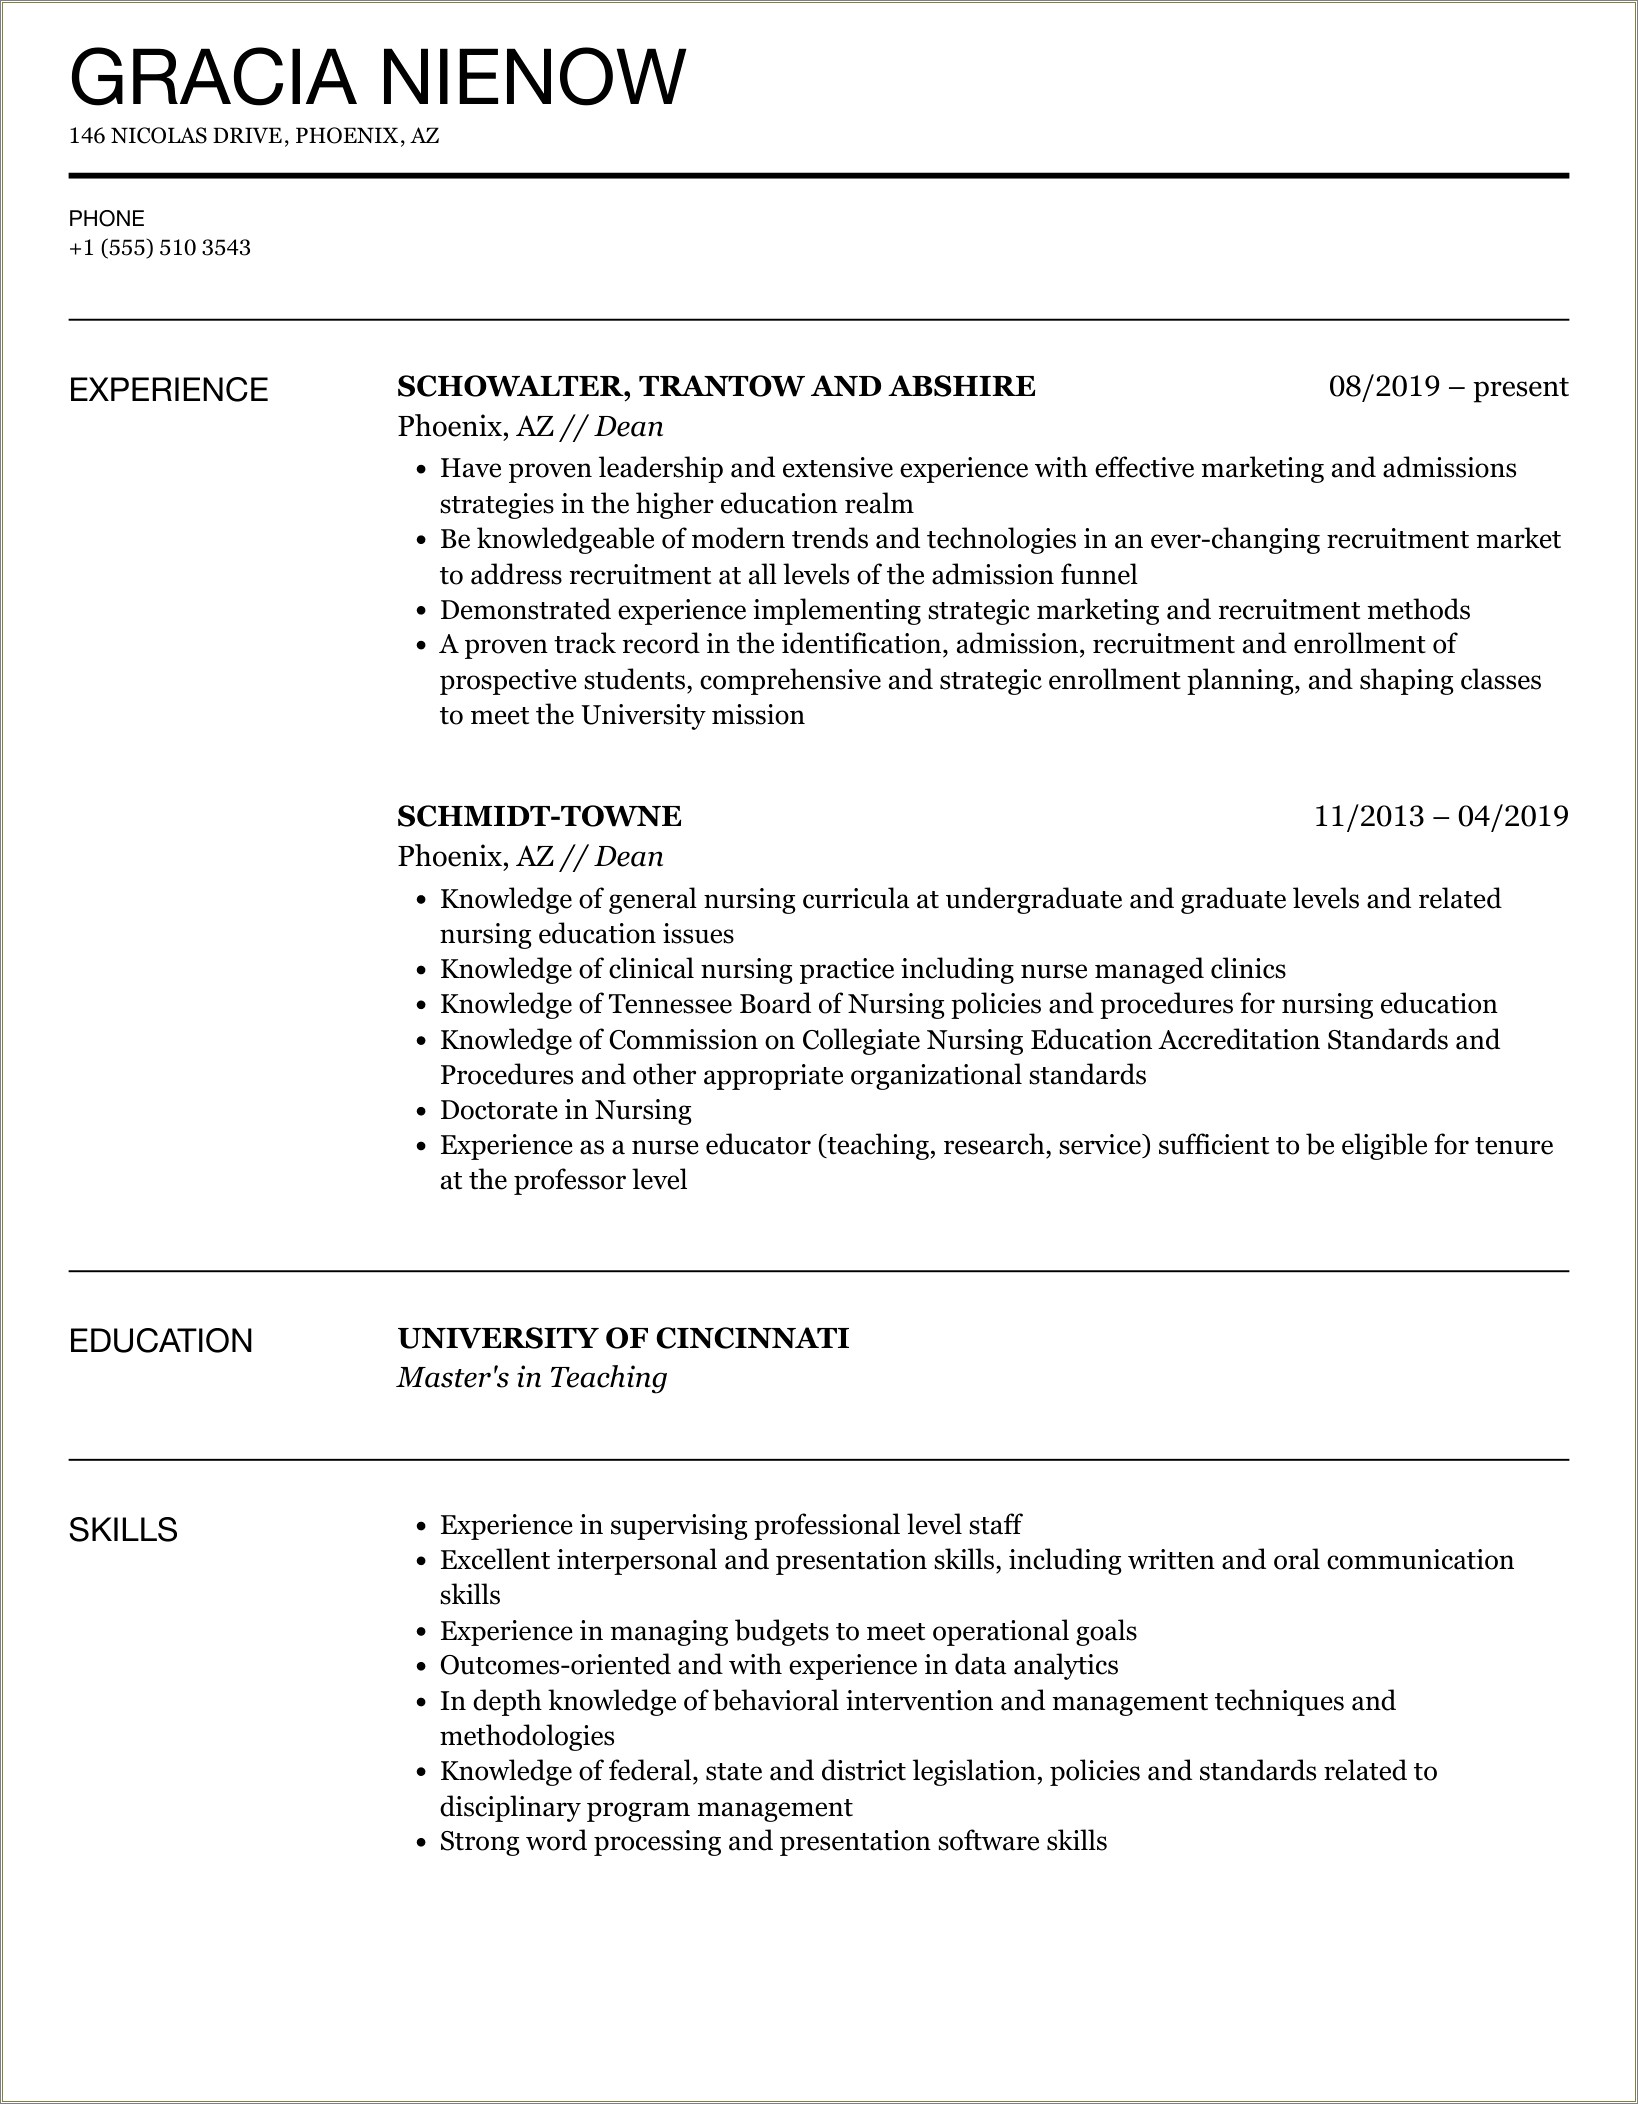 Resumes For Dean Of Students Jobs